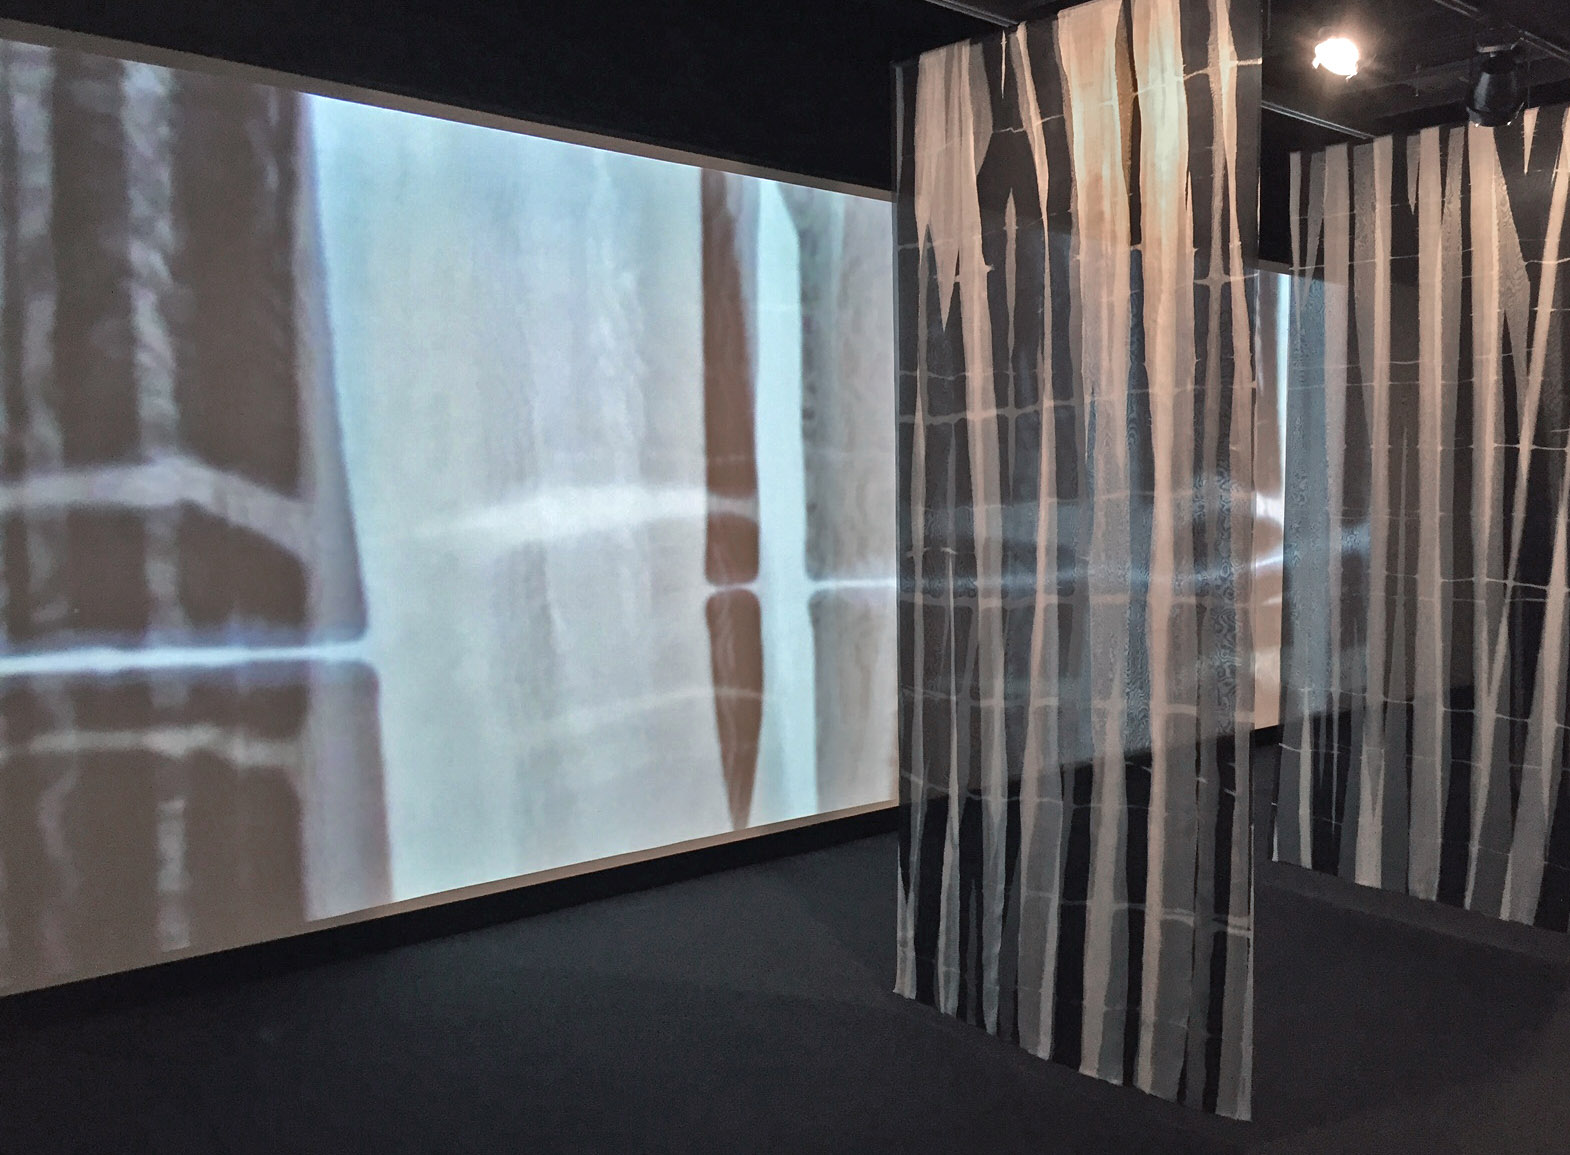 Elin Noble's installation "Vox Stellarum" at the Robert Hillestad Textiles Gallery includes a complementary video, displayed via a new projection software system.